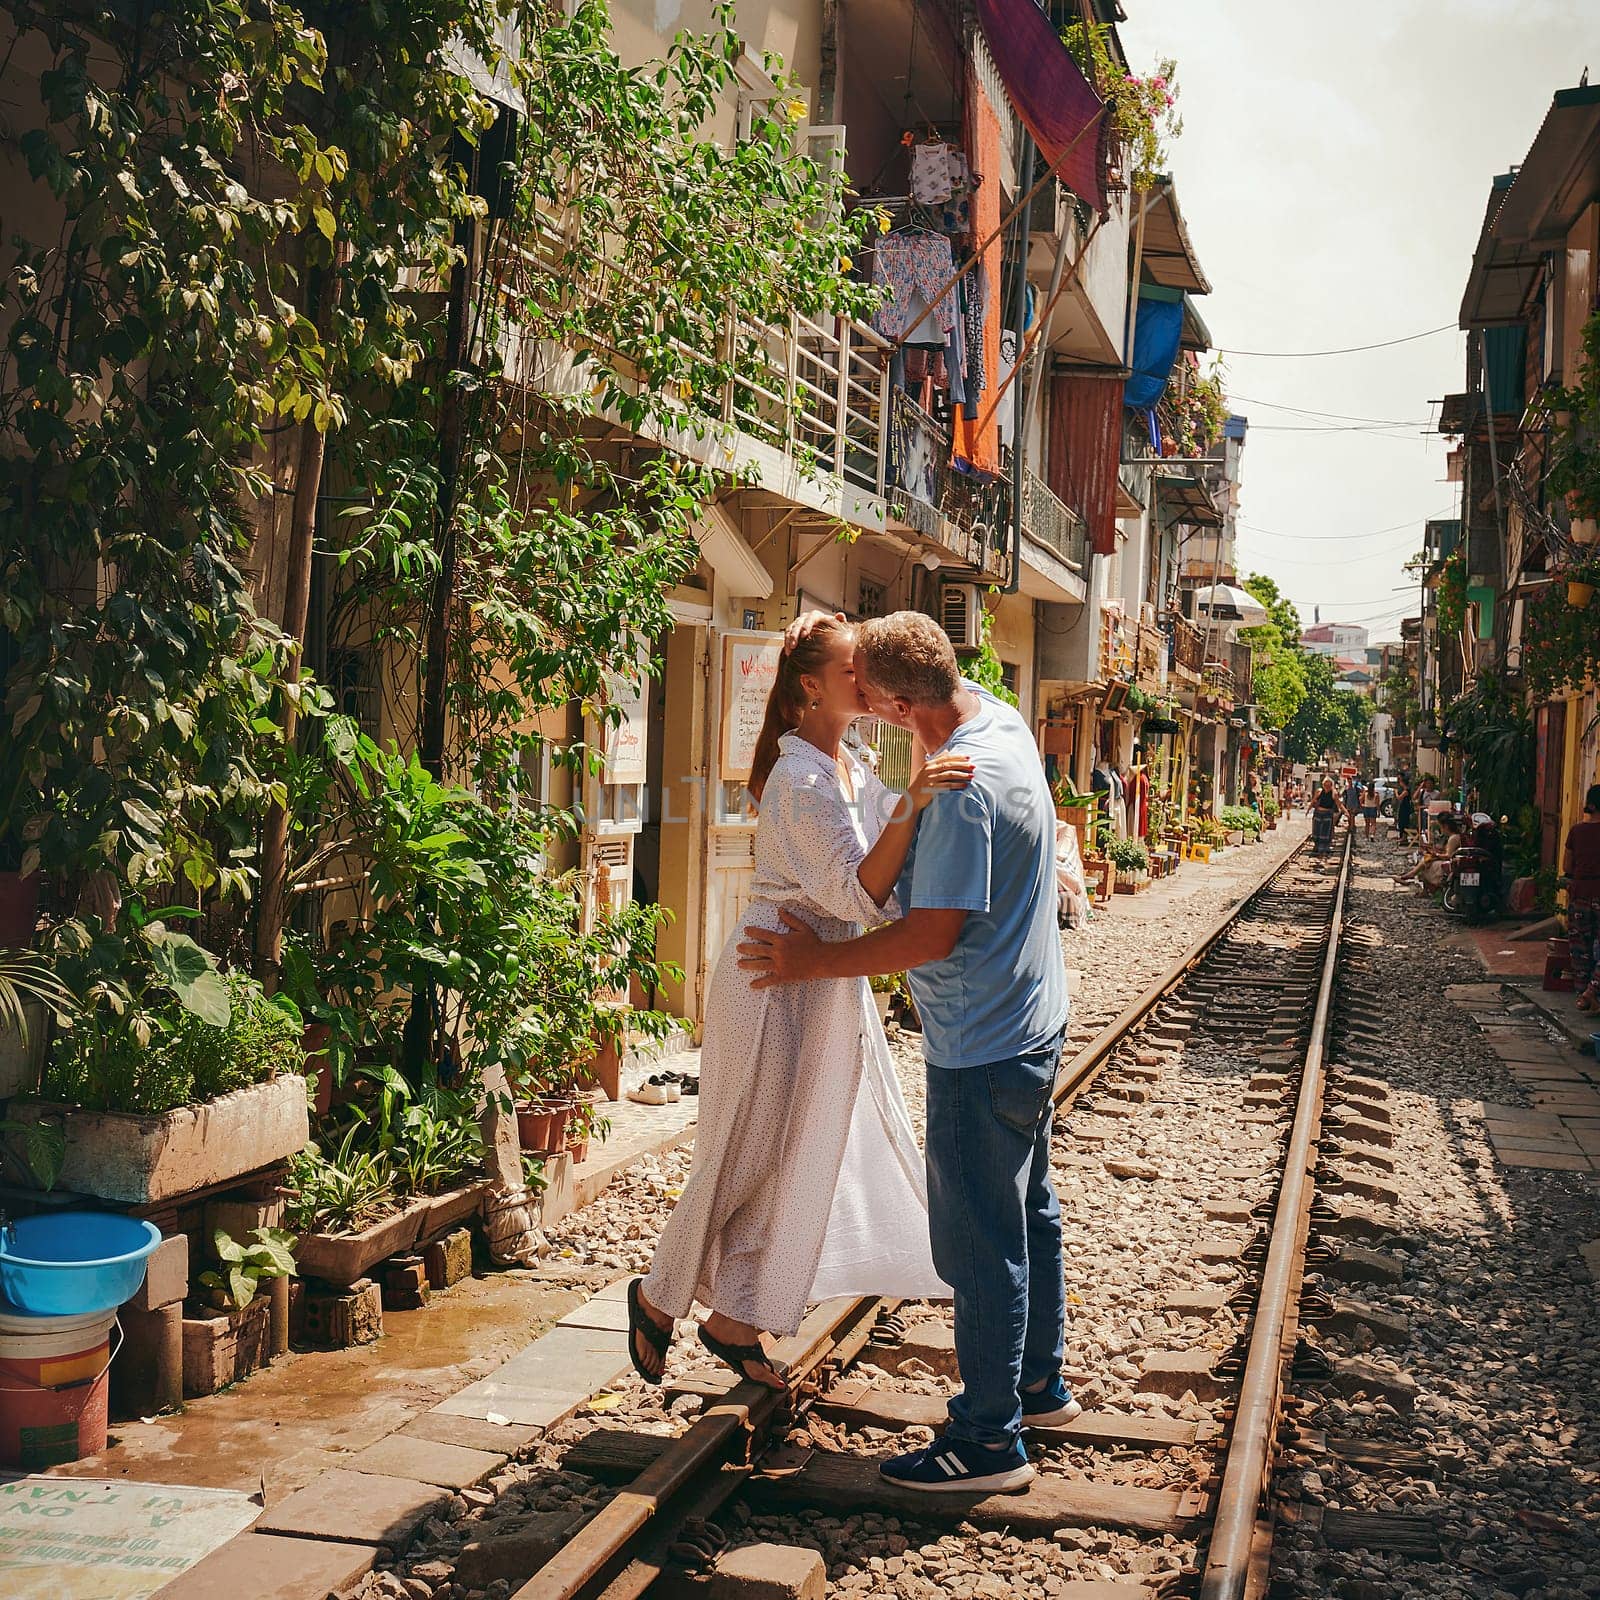 Theres always time for a kiss. a happy couple sharing a romantic moment on the train tracks in the streets of Vietnam. by YuriArcurs